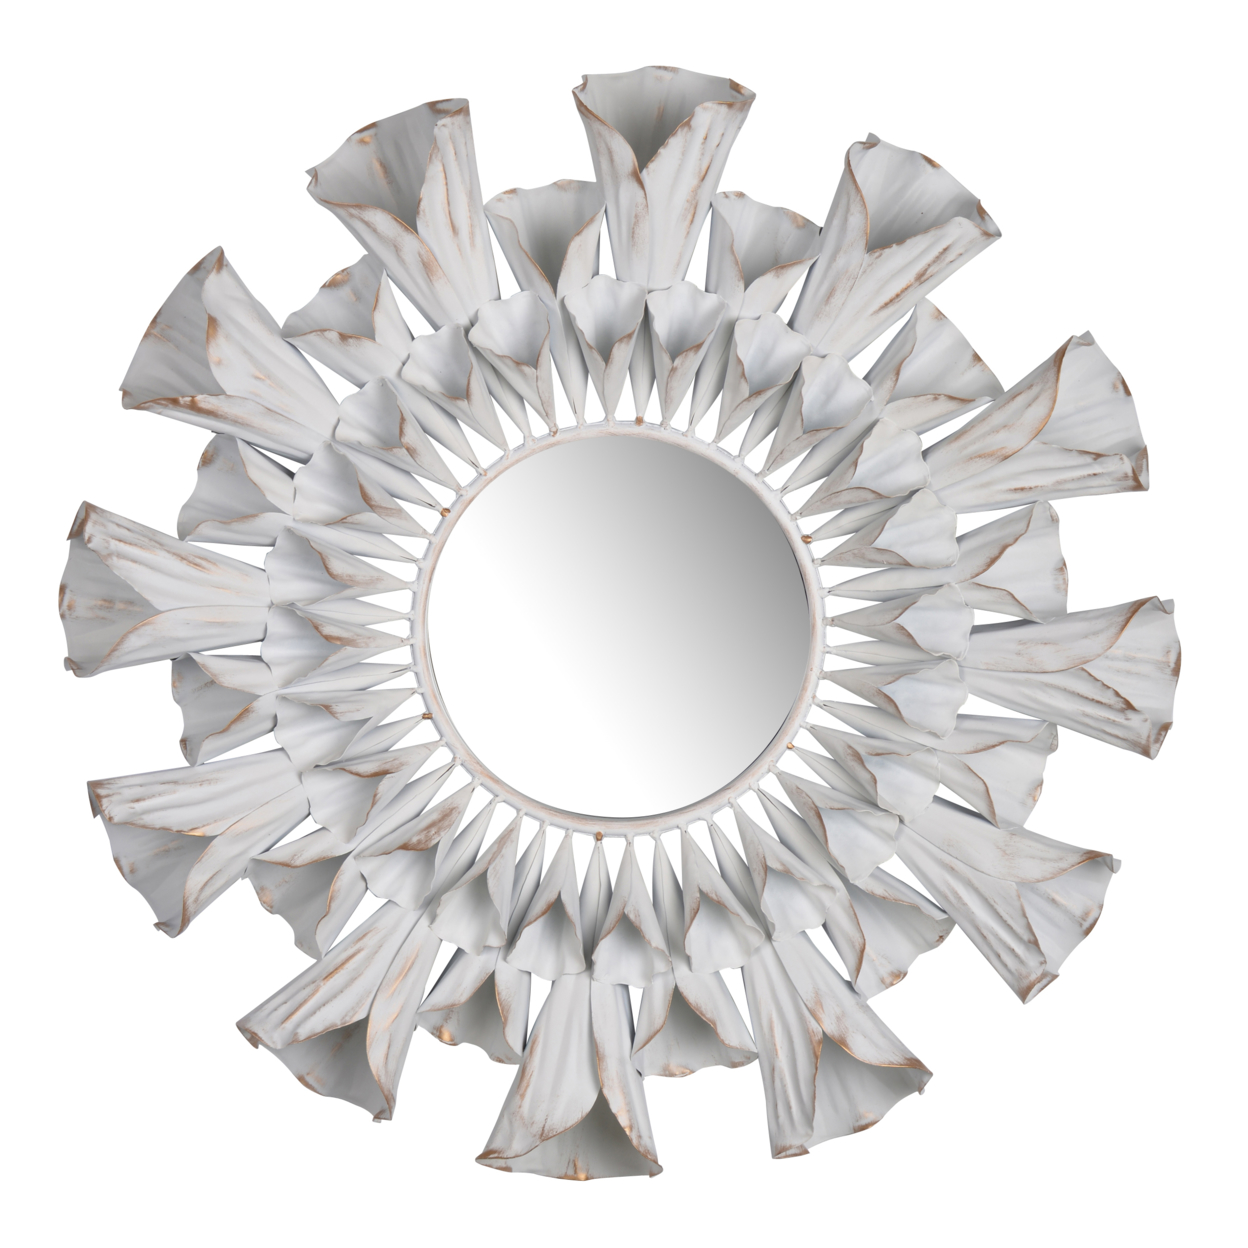 Decorative Metal Wall Mirror With Floral Accents, White And Clear- Saltoro Sherpi